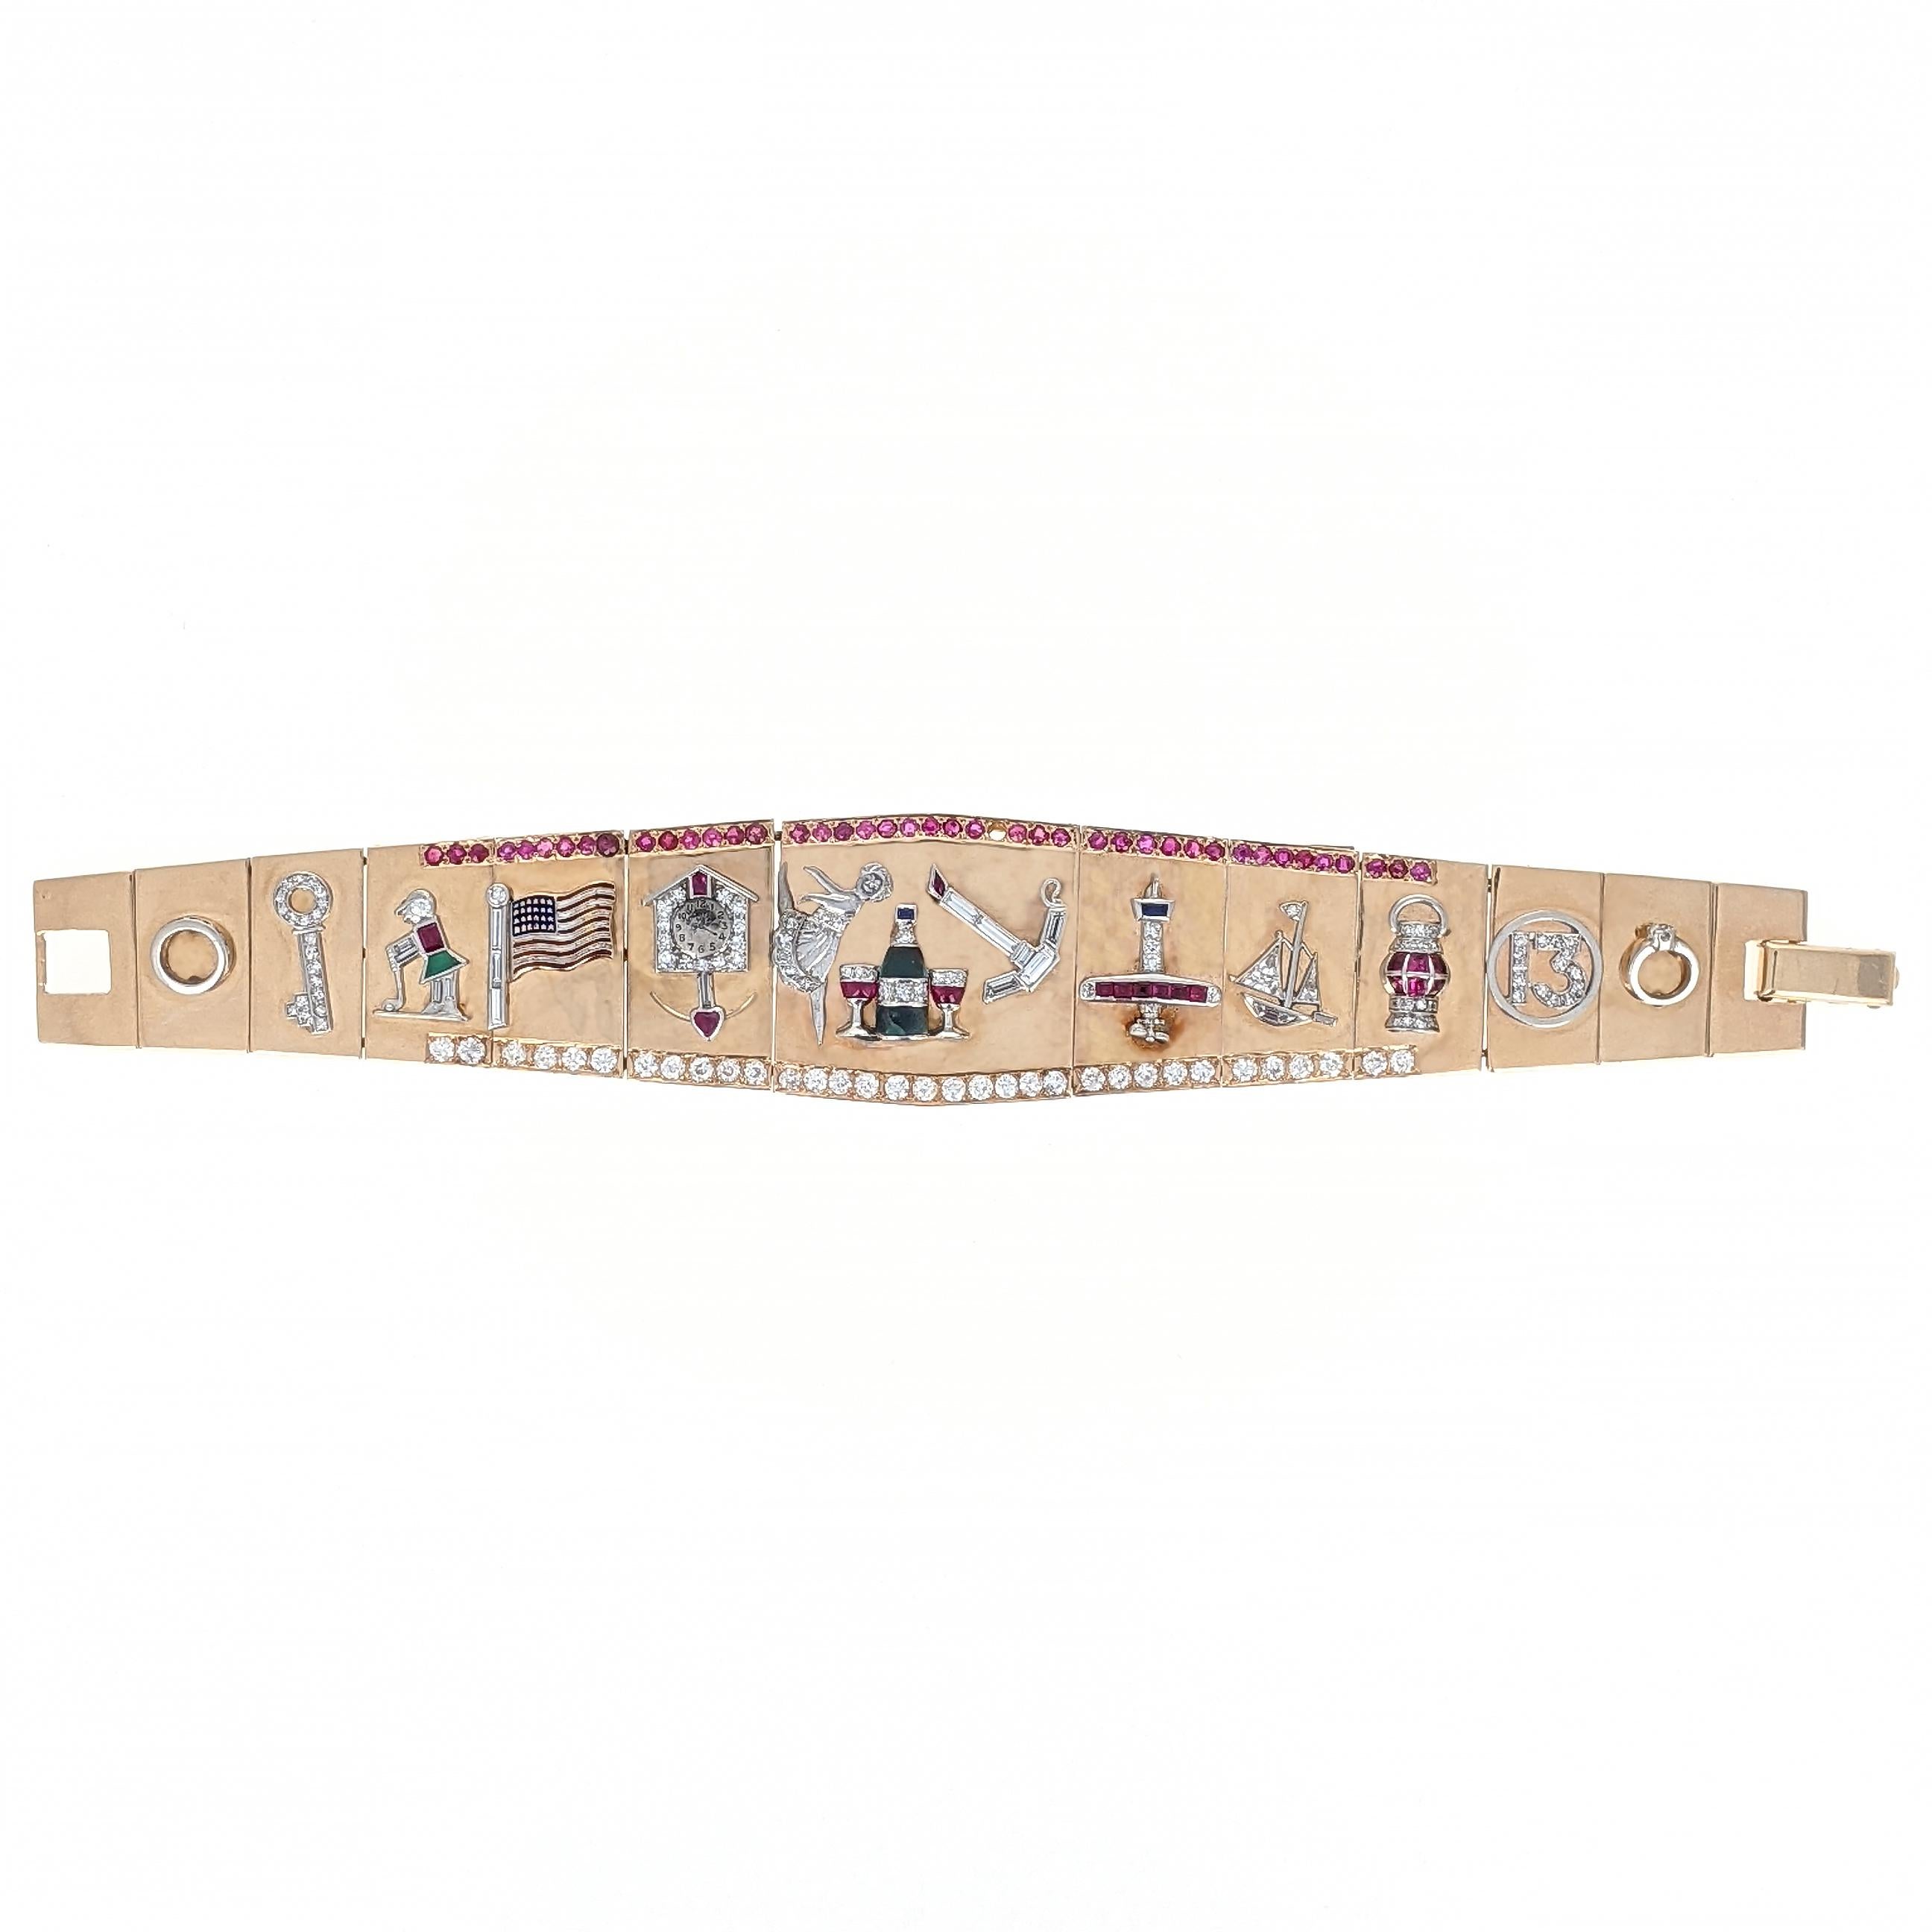 This unique retro charm bracelet is designed as a line of flat links in graduating size, the top accented with a line of round-cut rubies and the bottom accented with old-European cut diamonds. The bracelet features 13 Art Deco period charms: an